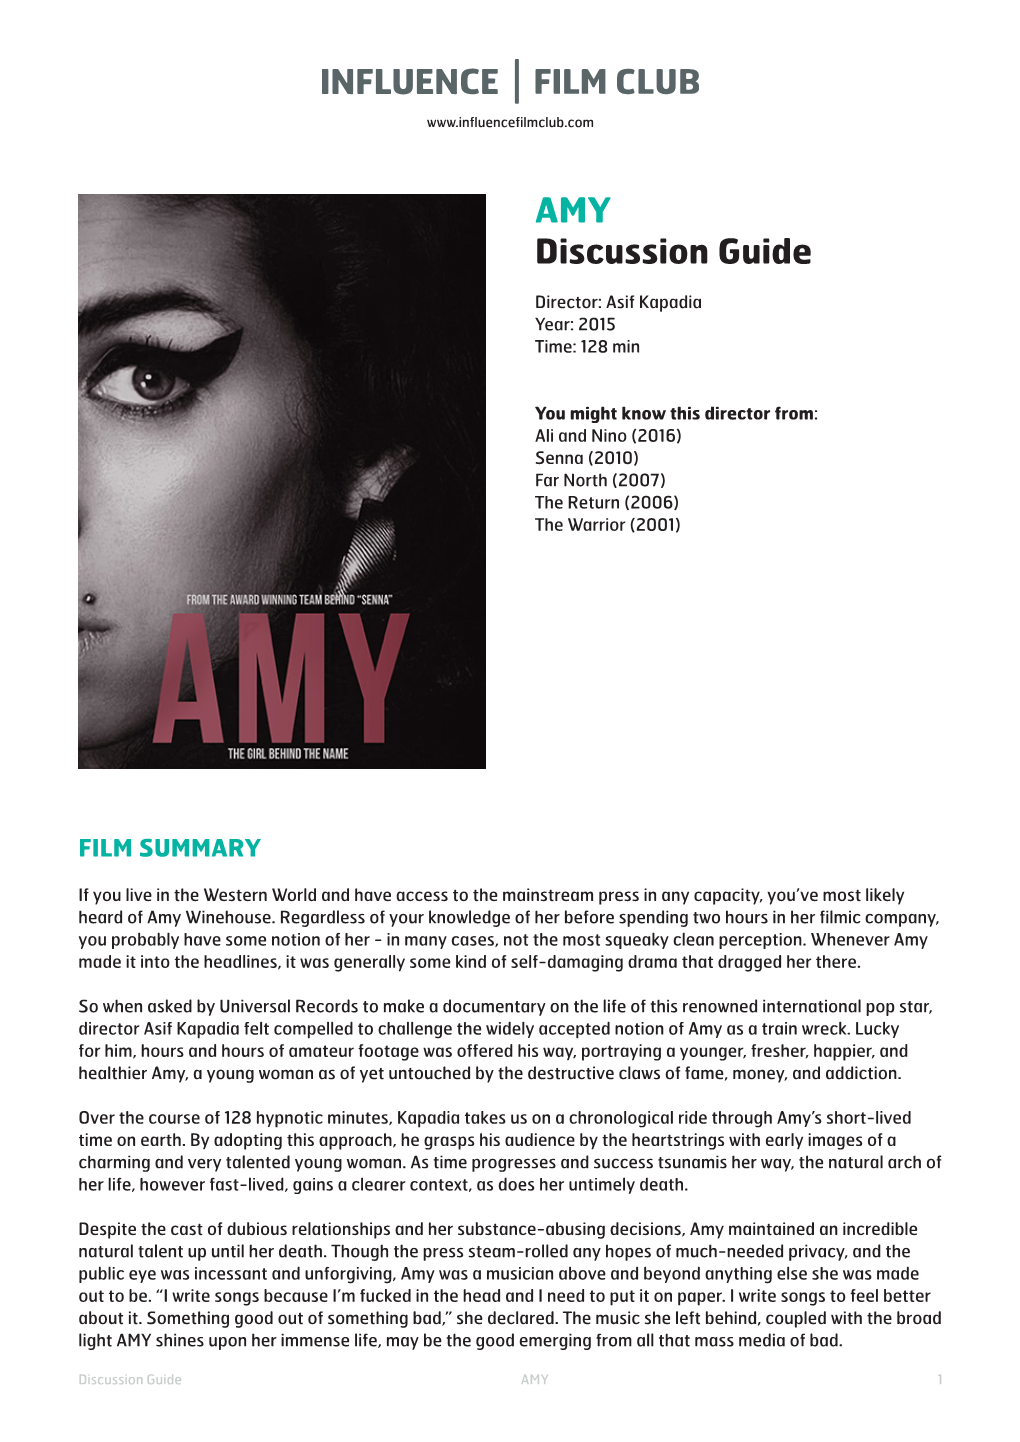 AMY Discussion Guide